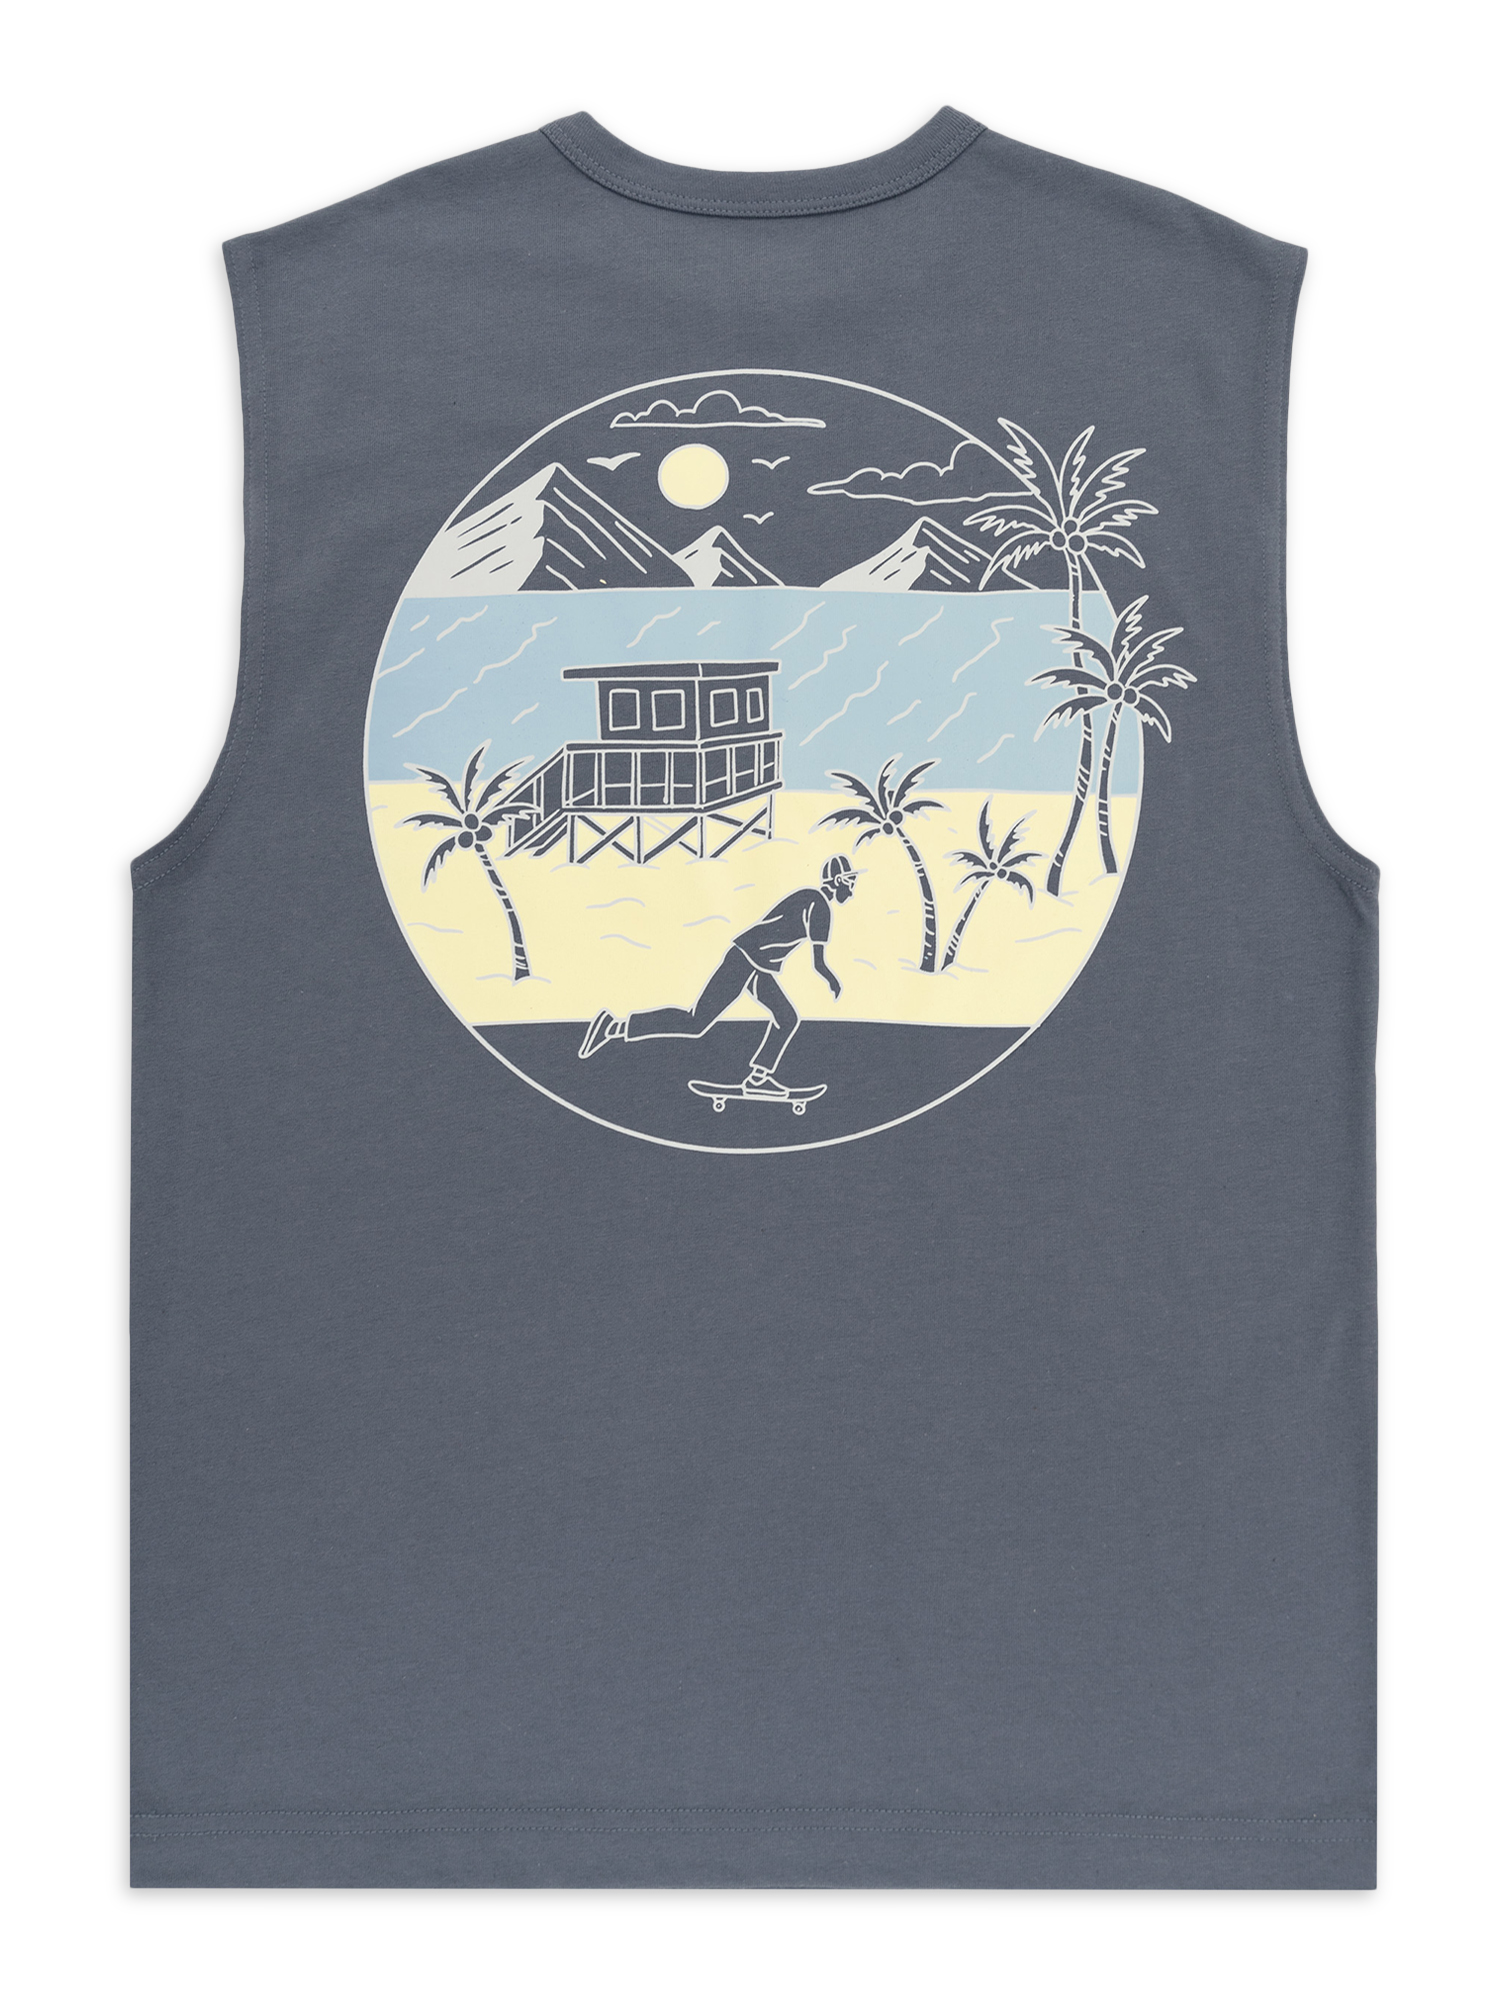 Wonder Nation Boy's Graphic Muscle Tank Top, Sizes 4-18 & Husky - image 5 of 5